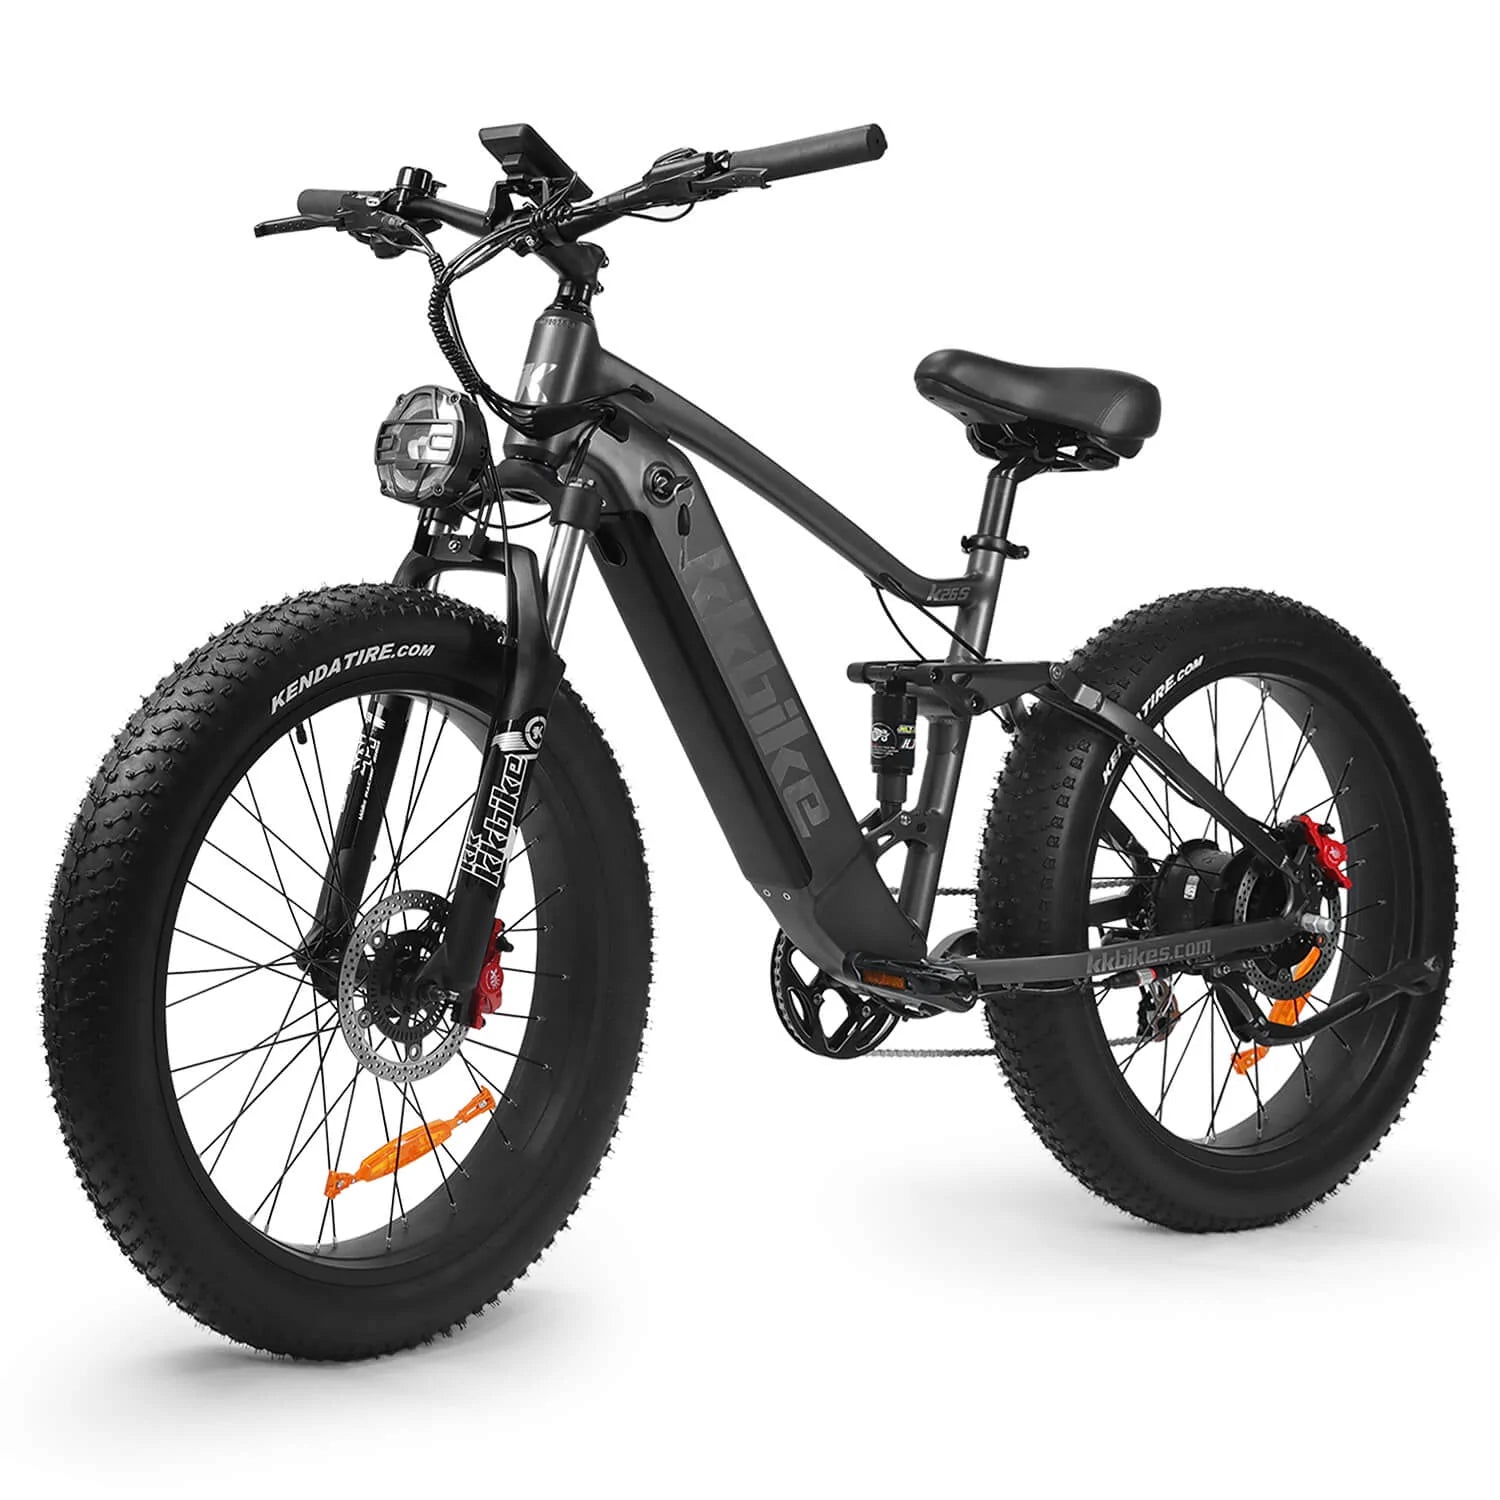 How practical is an e-bike for urban commuting?